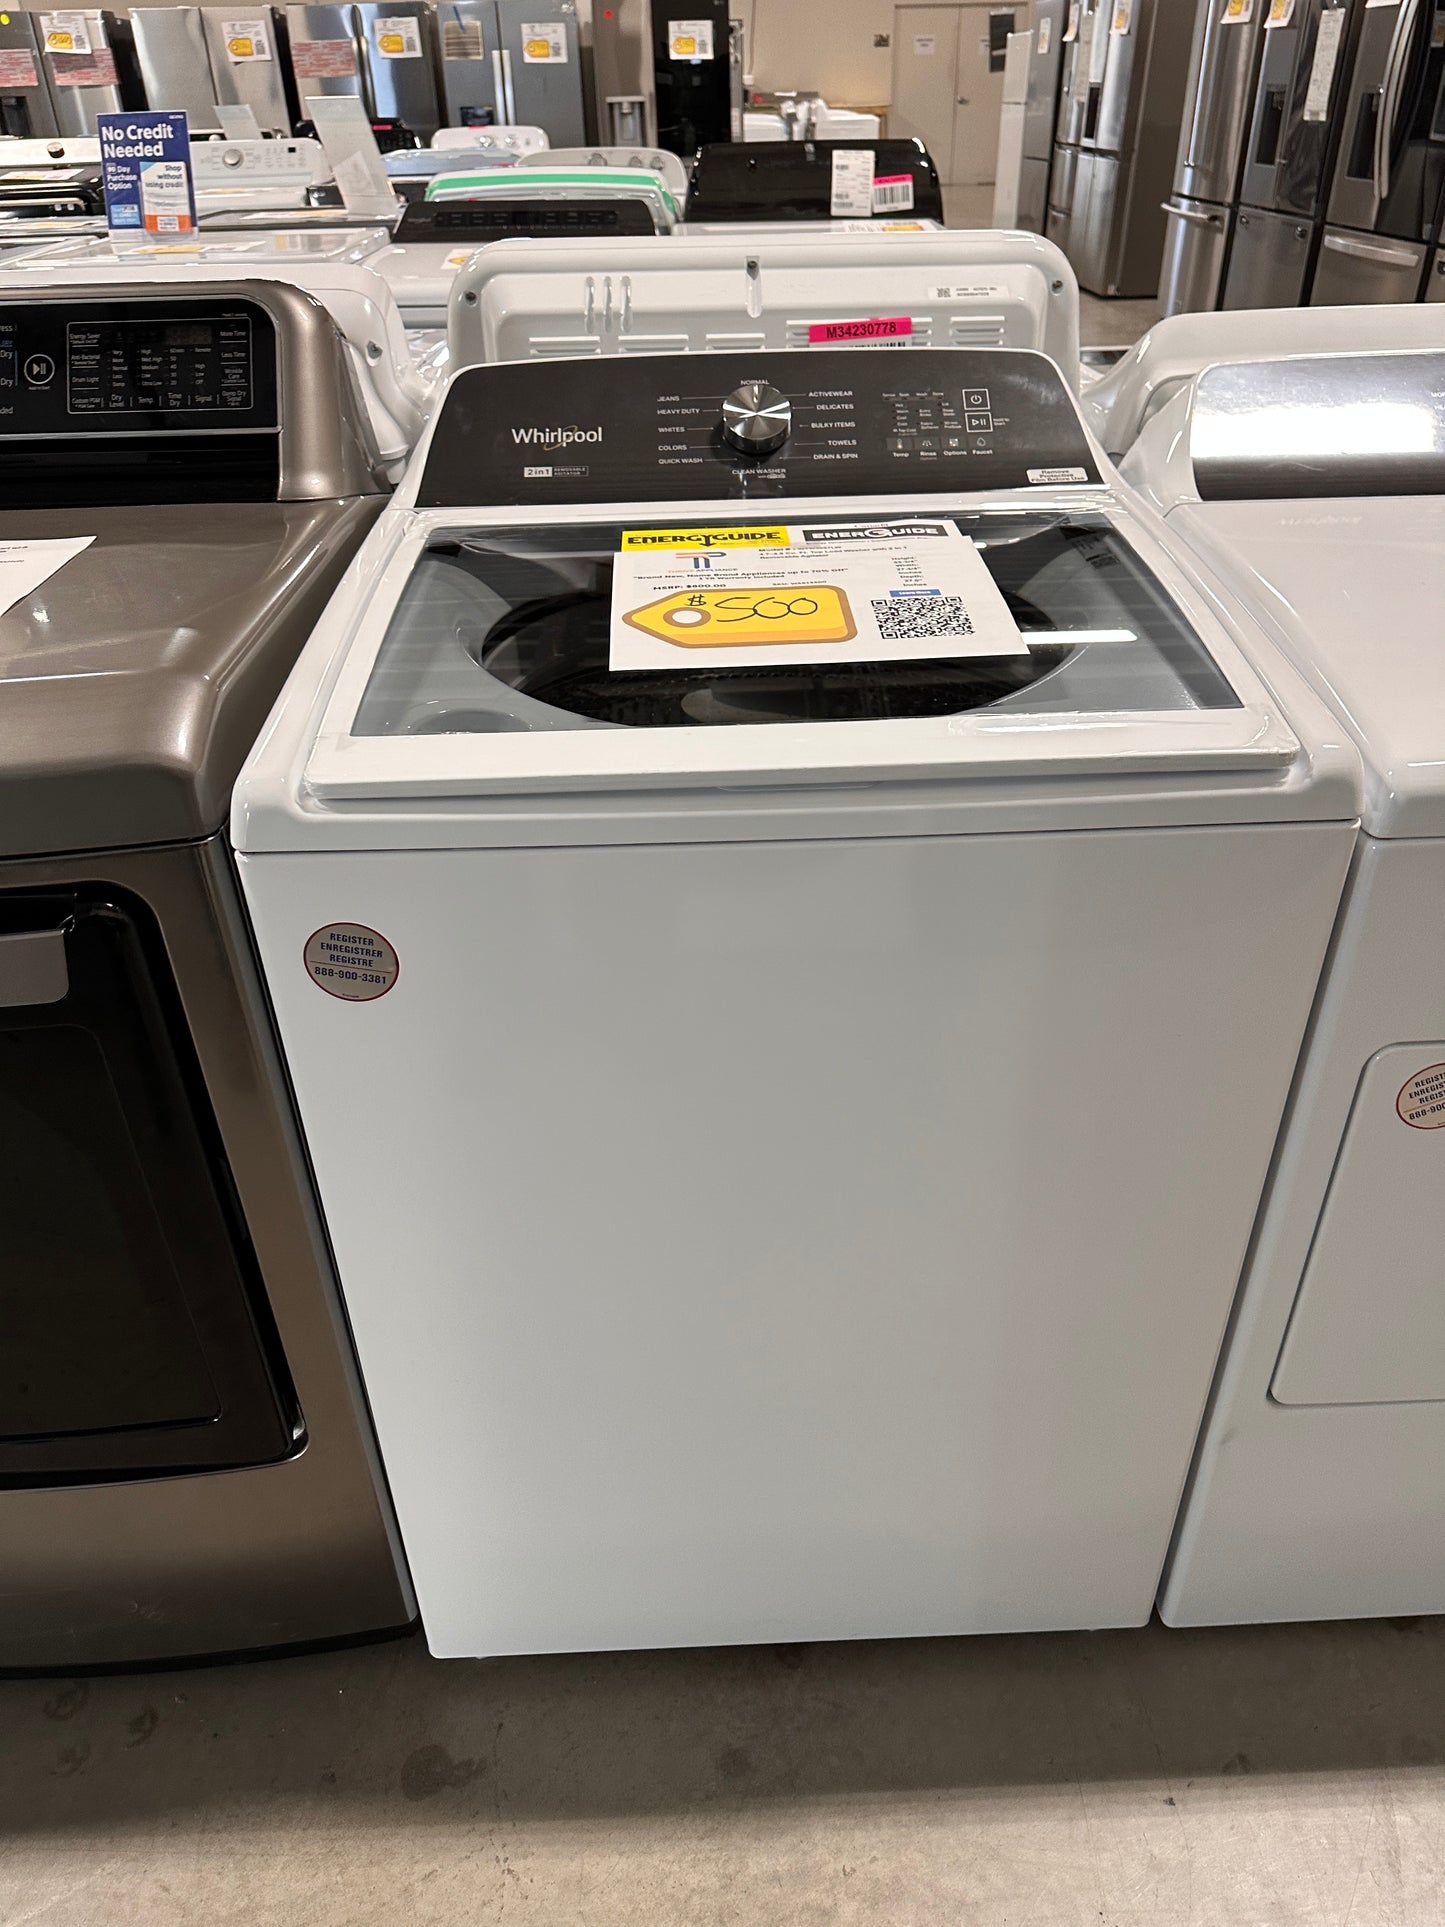 NEW WHIRLPOOL WASHER with 2 in 1 REMOVABLE AGITATOR MODEL: WTW5057LW WAS13300